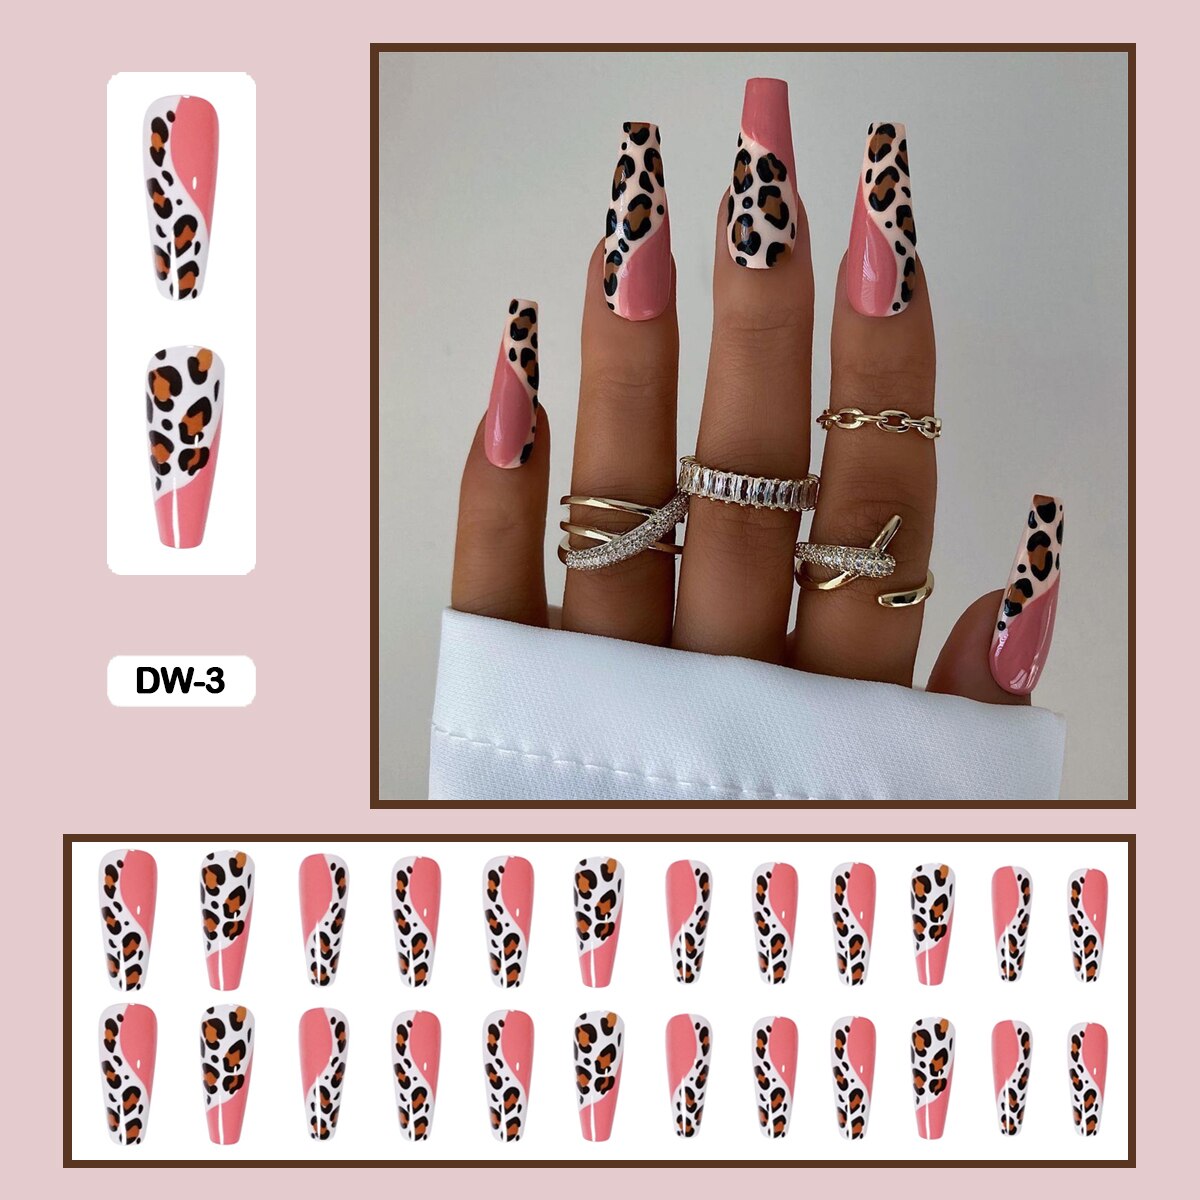 Graduation gifts 24pcs/box Long Trapezoid Press On False Nails With Glue Animal Patterns Leopard Nails Art Wearable Fake Nails With Wearing Tools